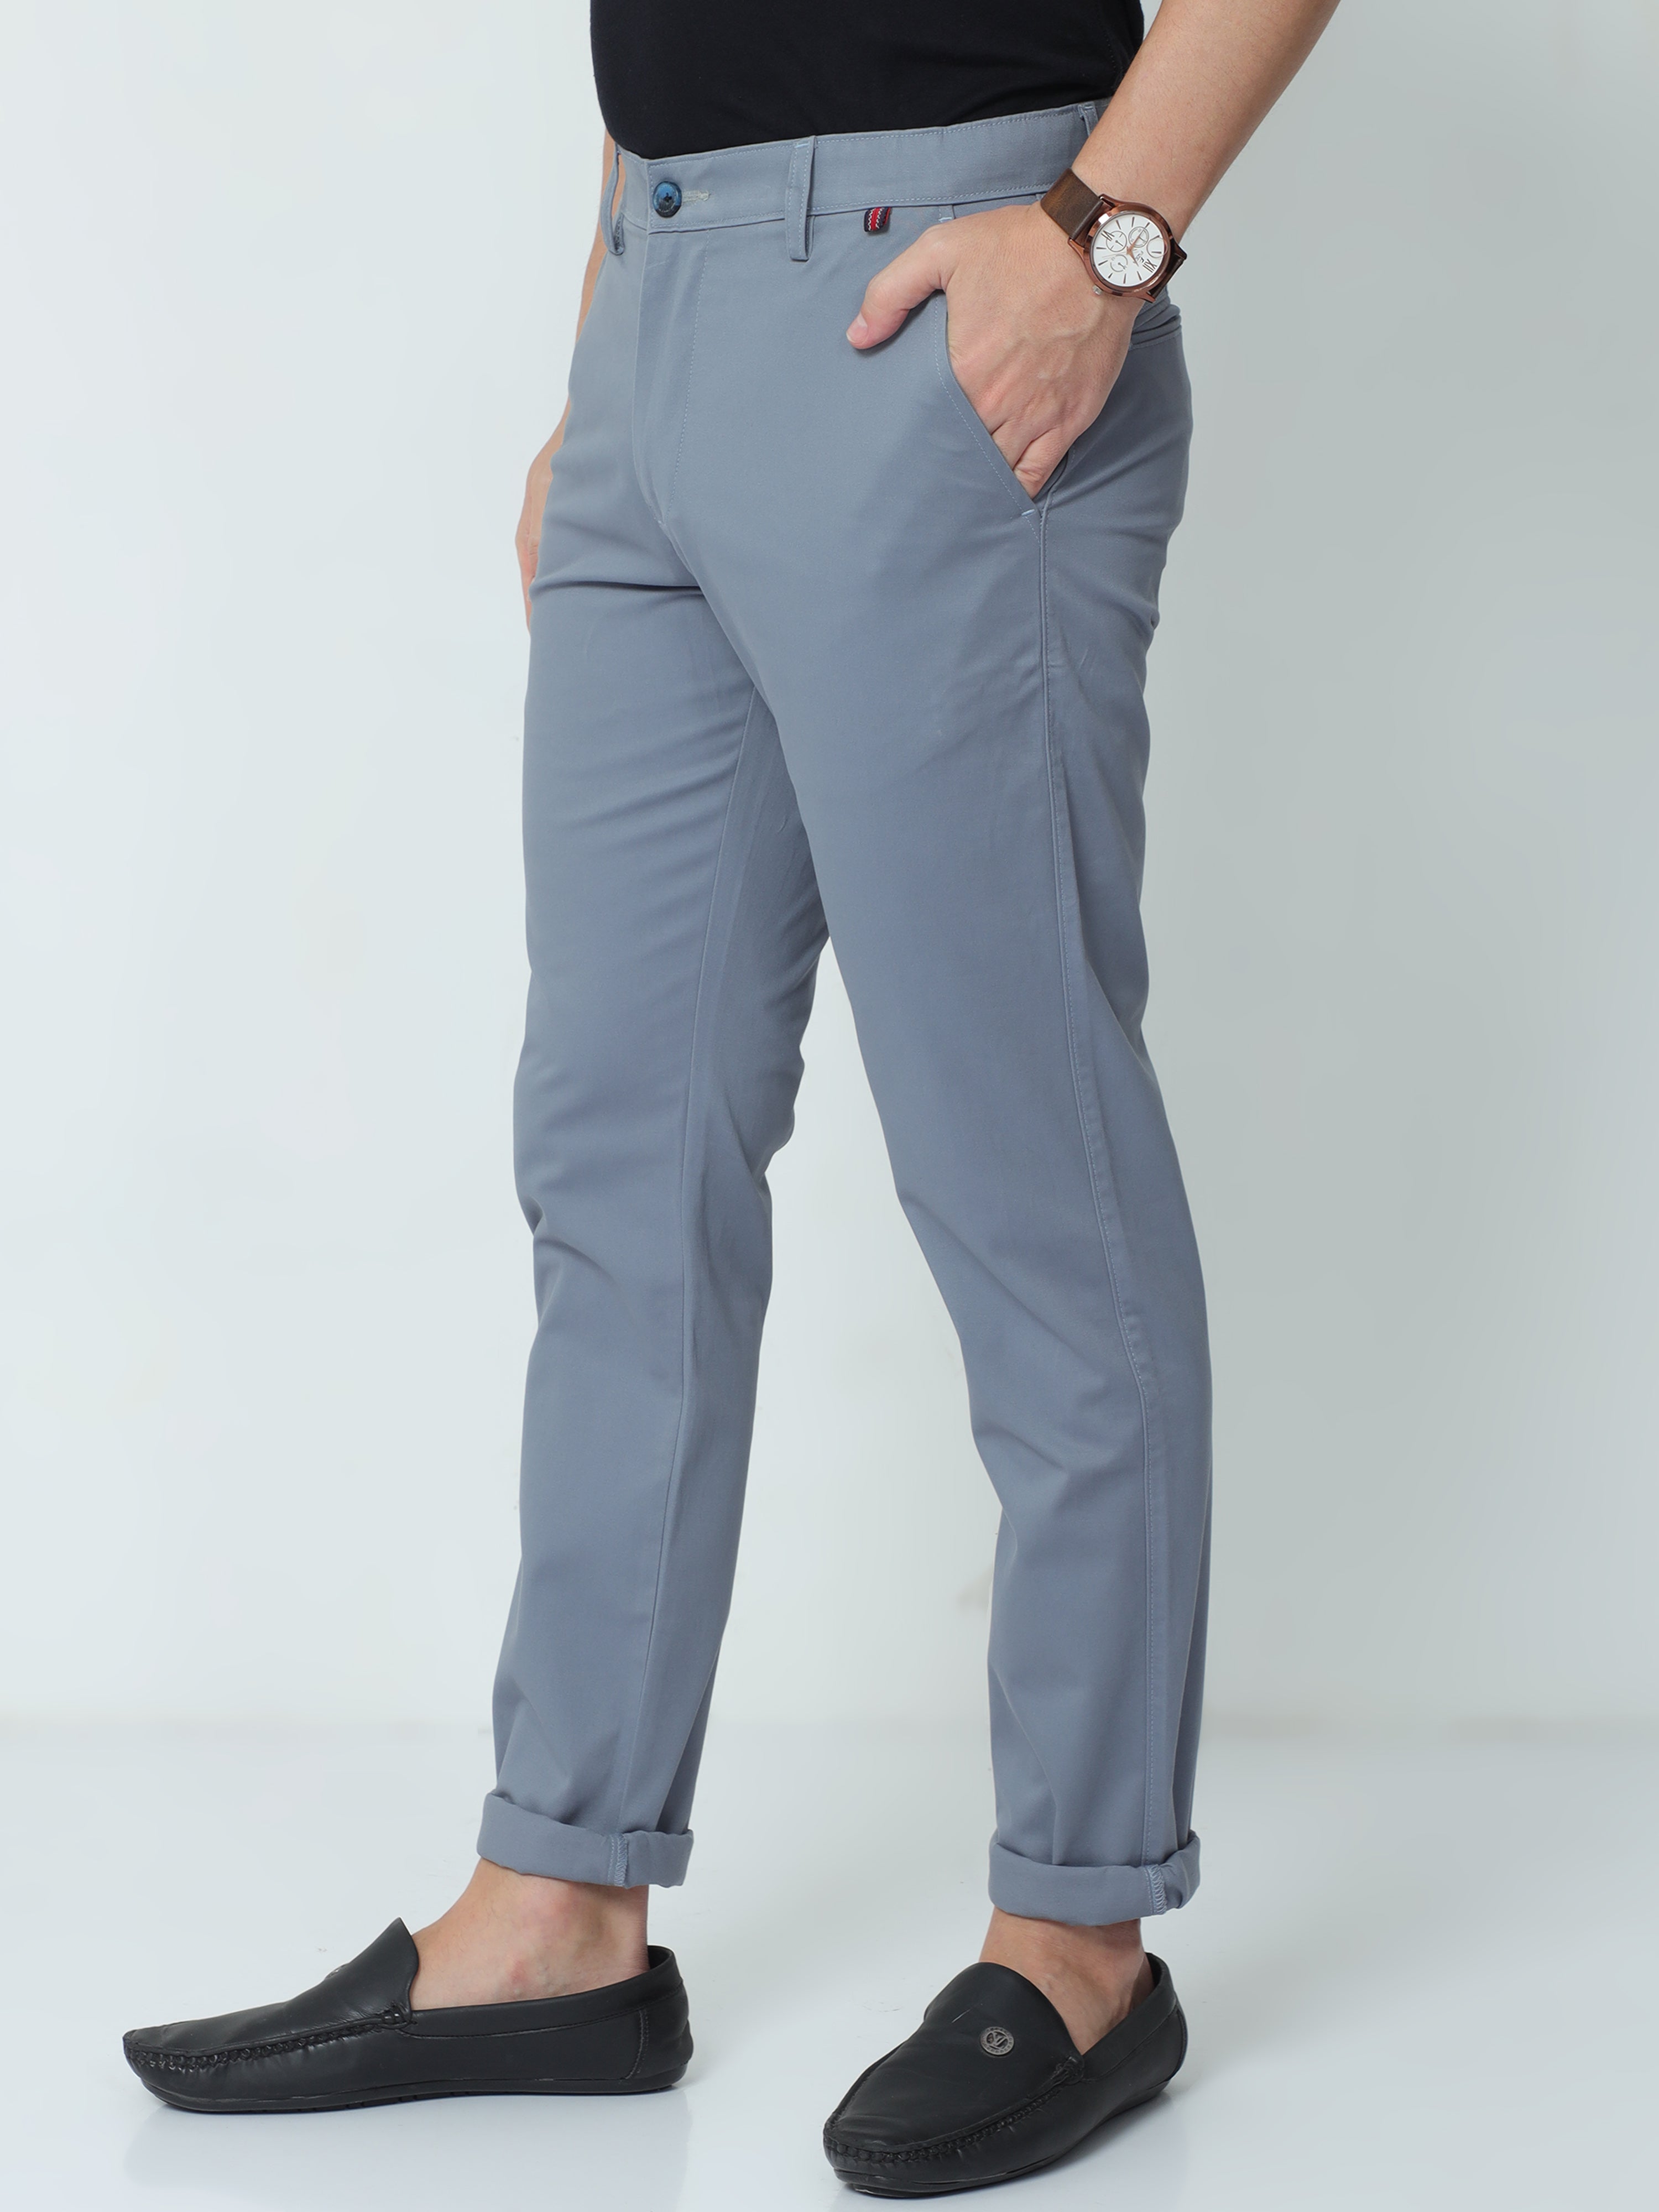 Classic Polo Mens Moderate Fit Solid Light Blue Color Trousers | To2-17 B-Blu-Mf-Ly